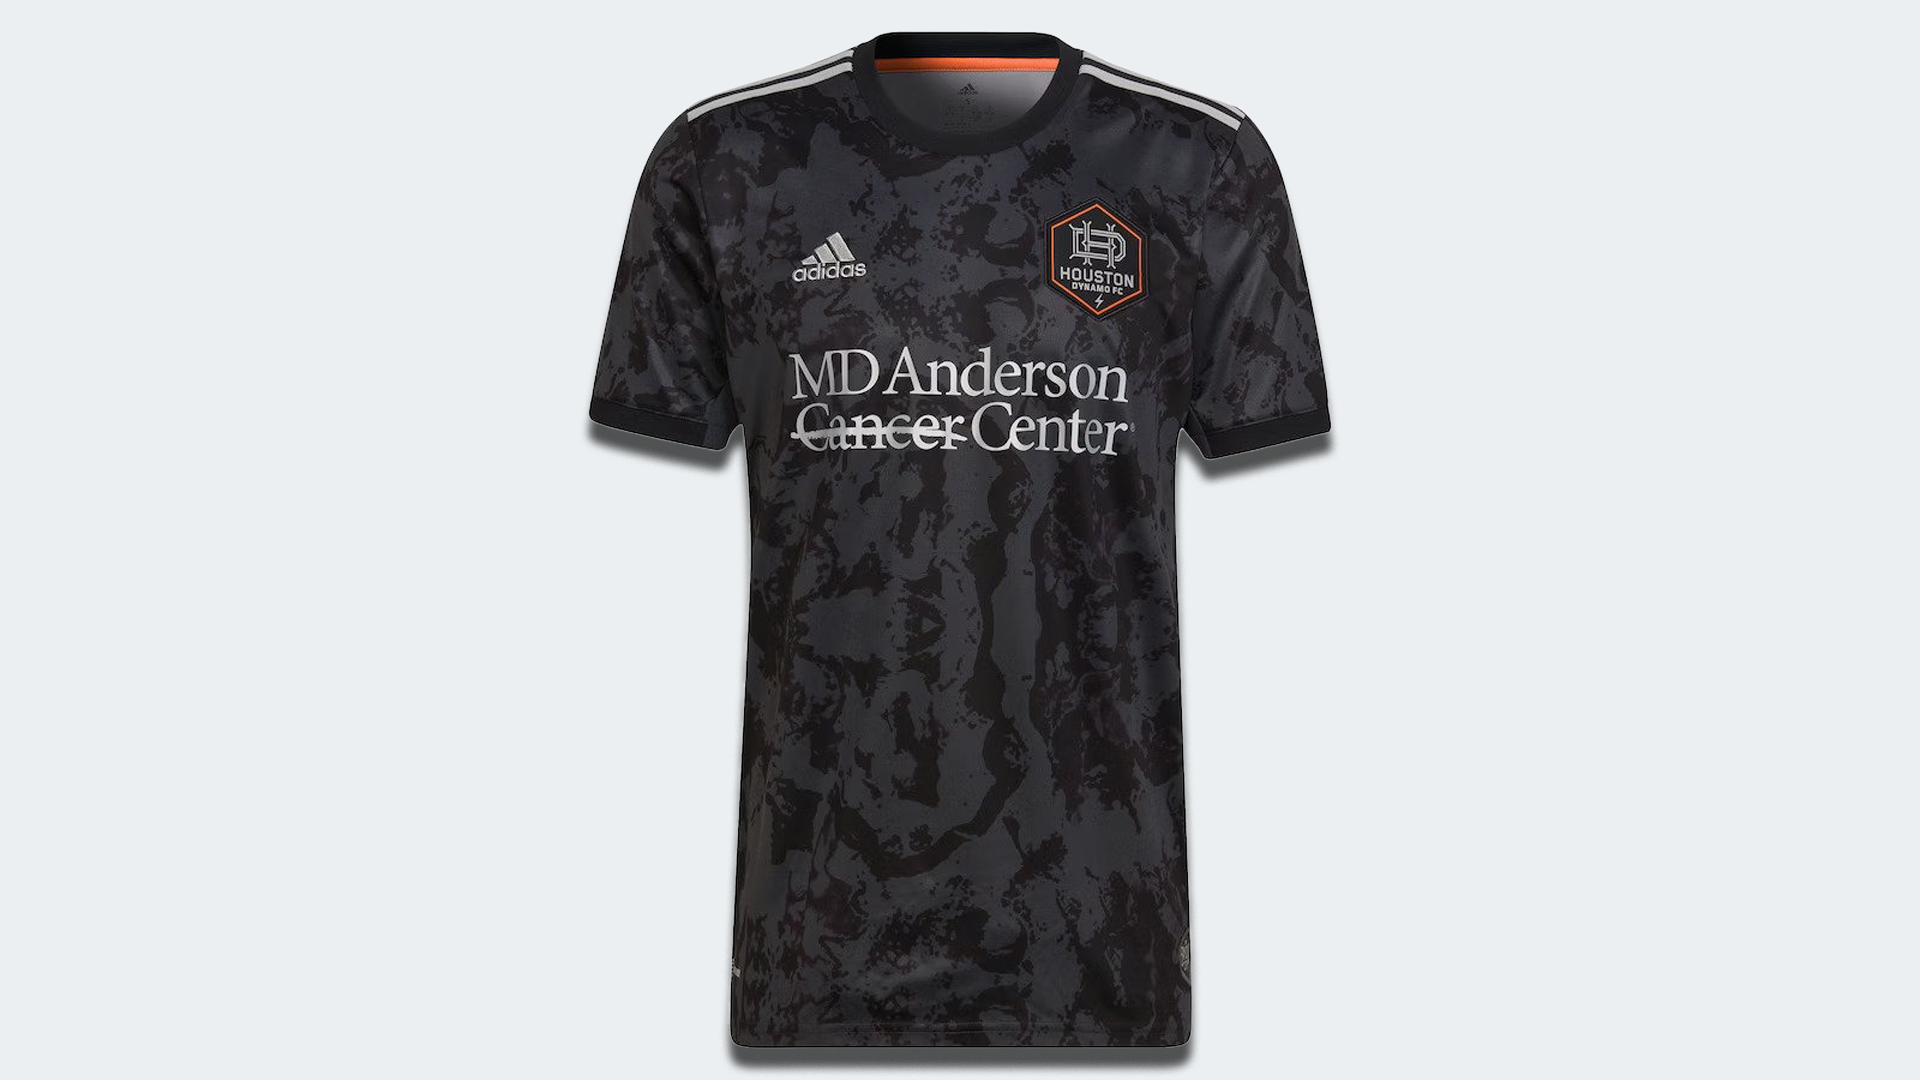 Anderson Jack away jersey